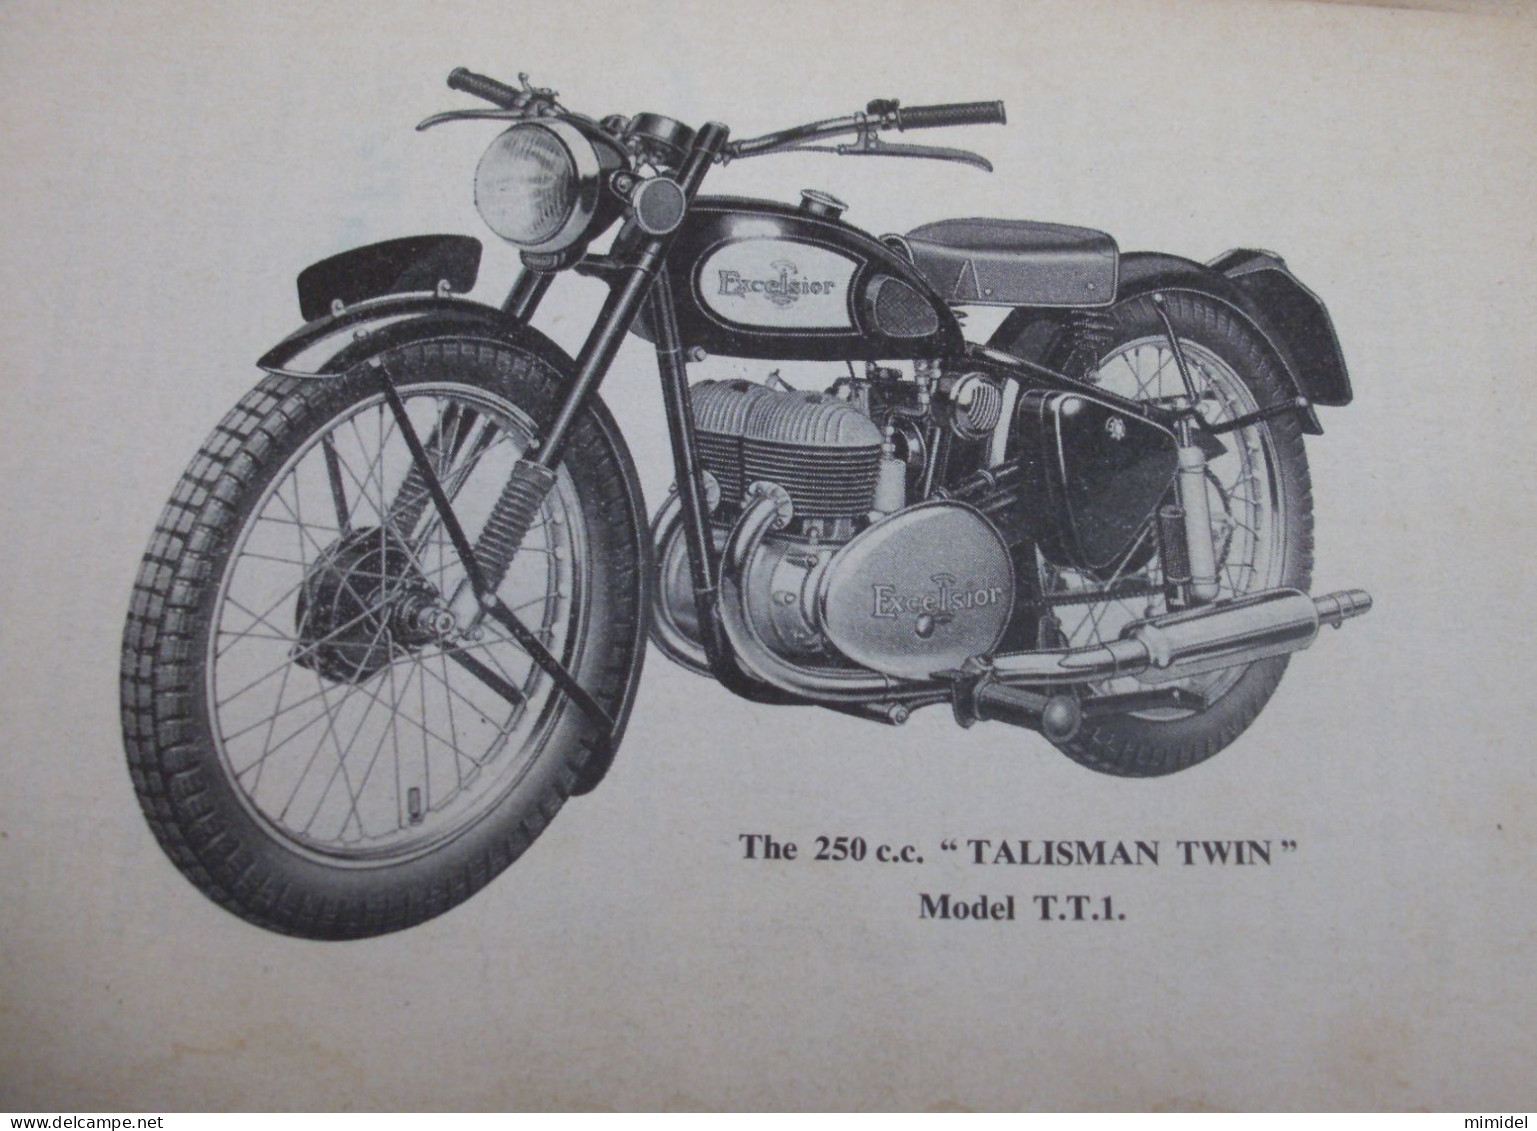 Motocycle Excelsior Talisman Twin 250cc Running And Maintenance Instructions - Moto